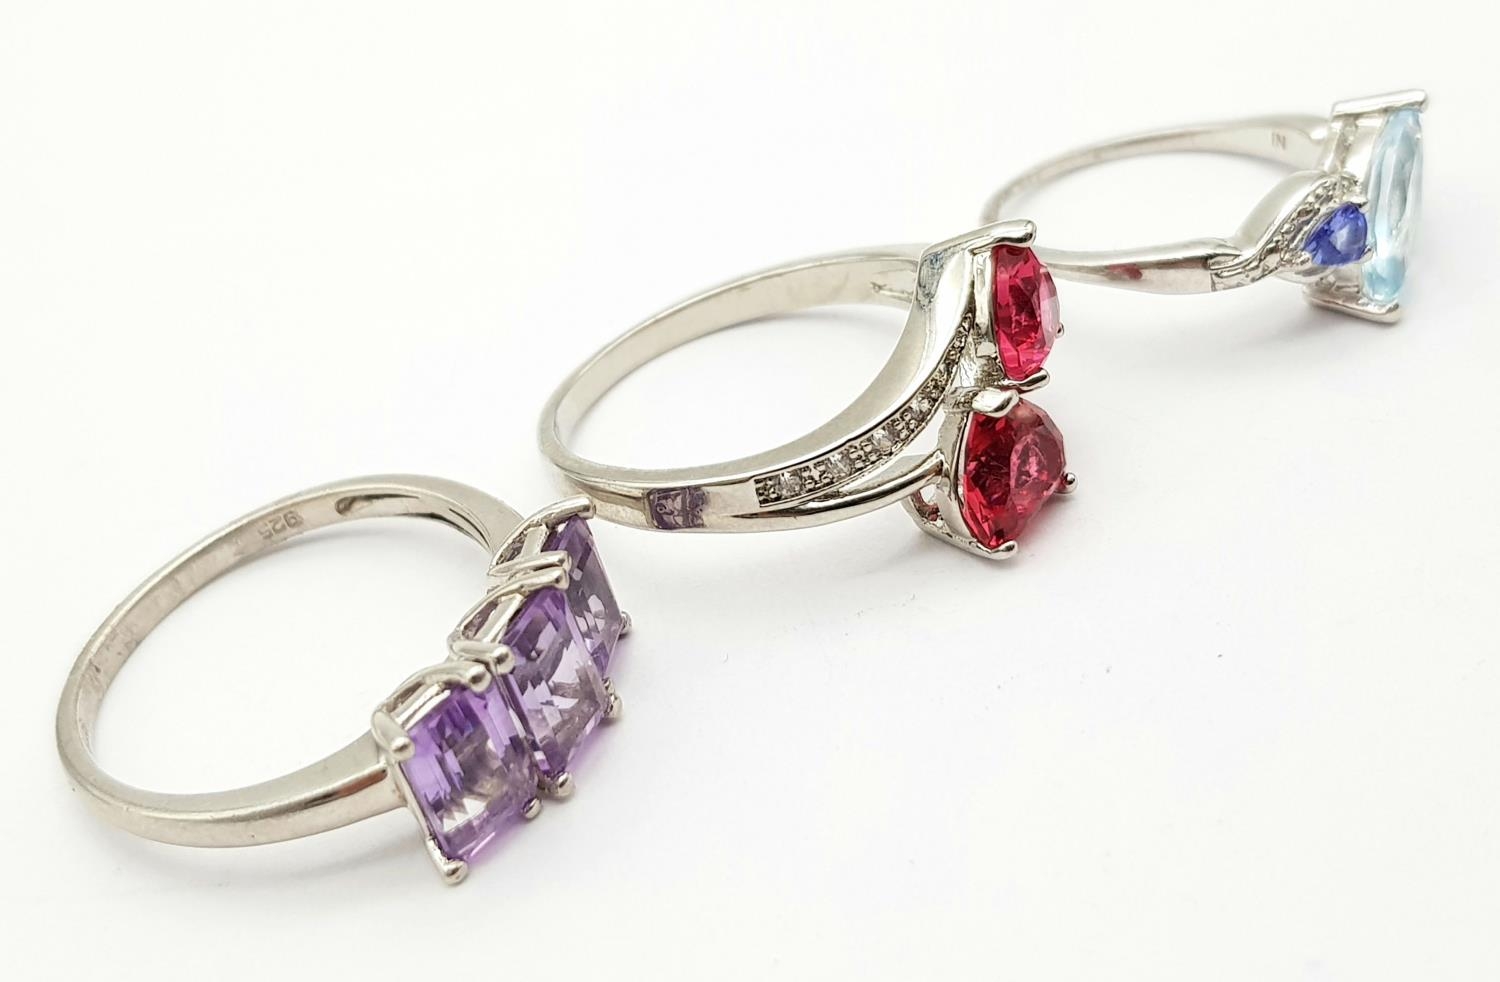 Three 925 Silver Different Style Stone Set Rings. Sizes: 2 X T, 1 x N. - Image 3 of 5